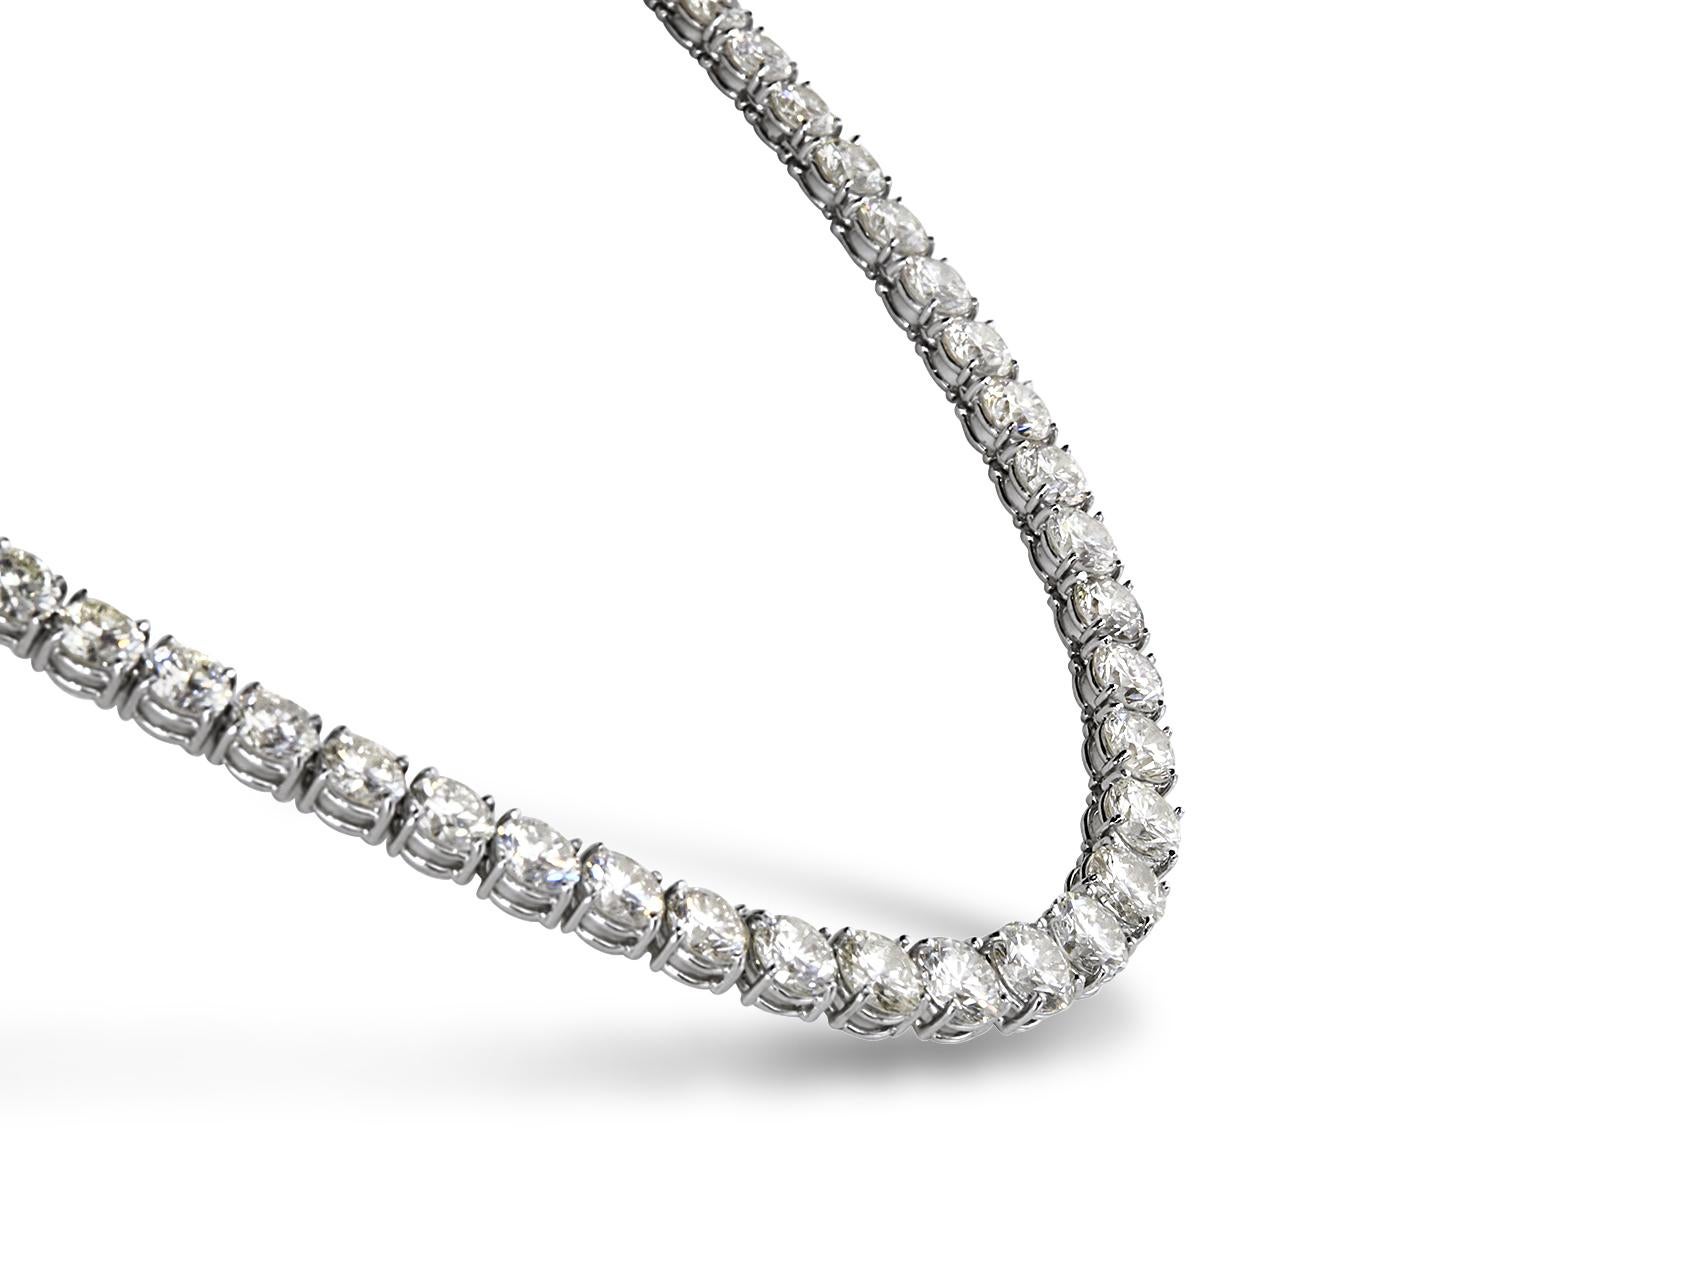 Classic 12.00 Carat Round Diamond 18'' Tennis Necklace in 14K White Gold. Certified by IGI Laboratory in New York, with full diamond jewelry grading report.

12.00 Carats of Brilliant Round White VS-SI Diamonds,
and 23.00 grams of 14K White